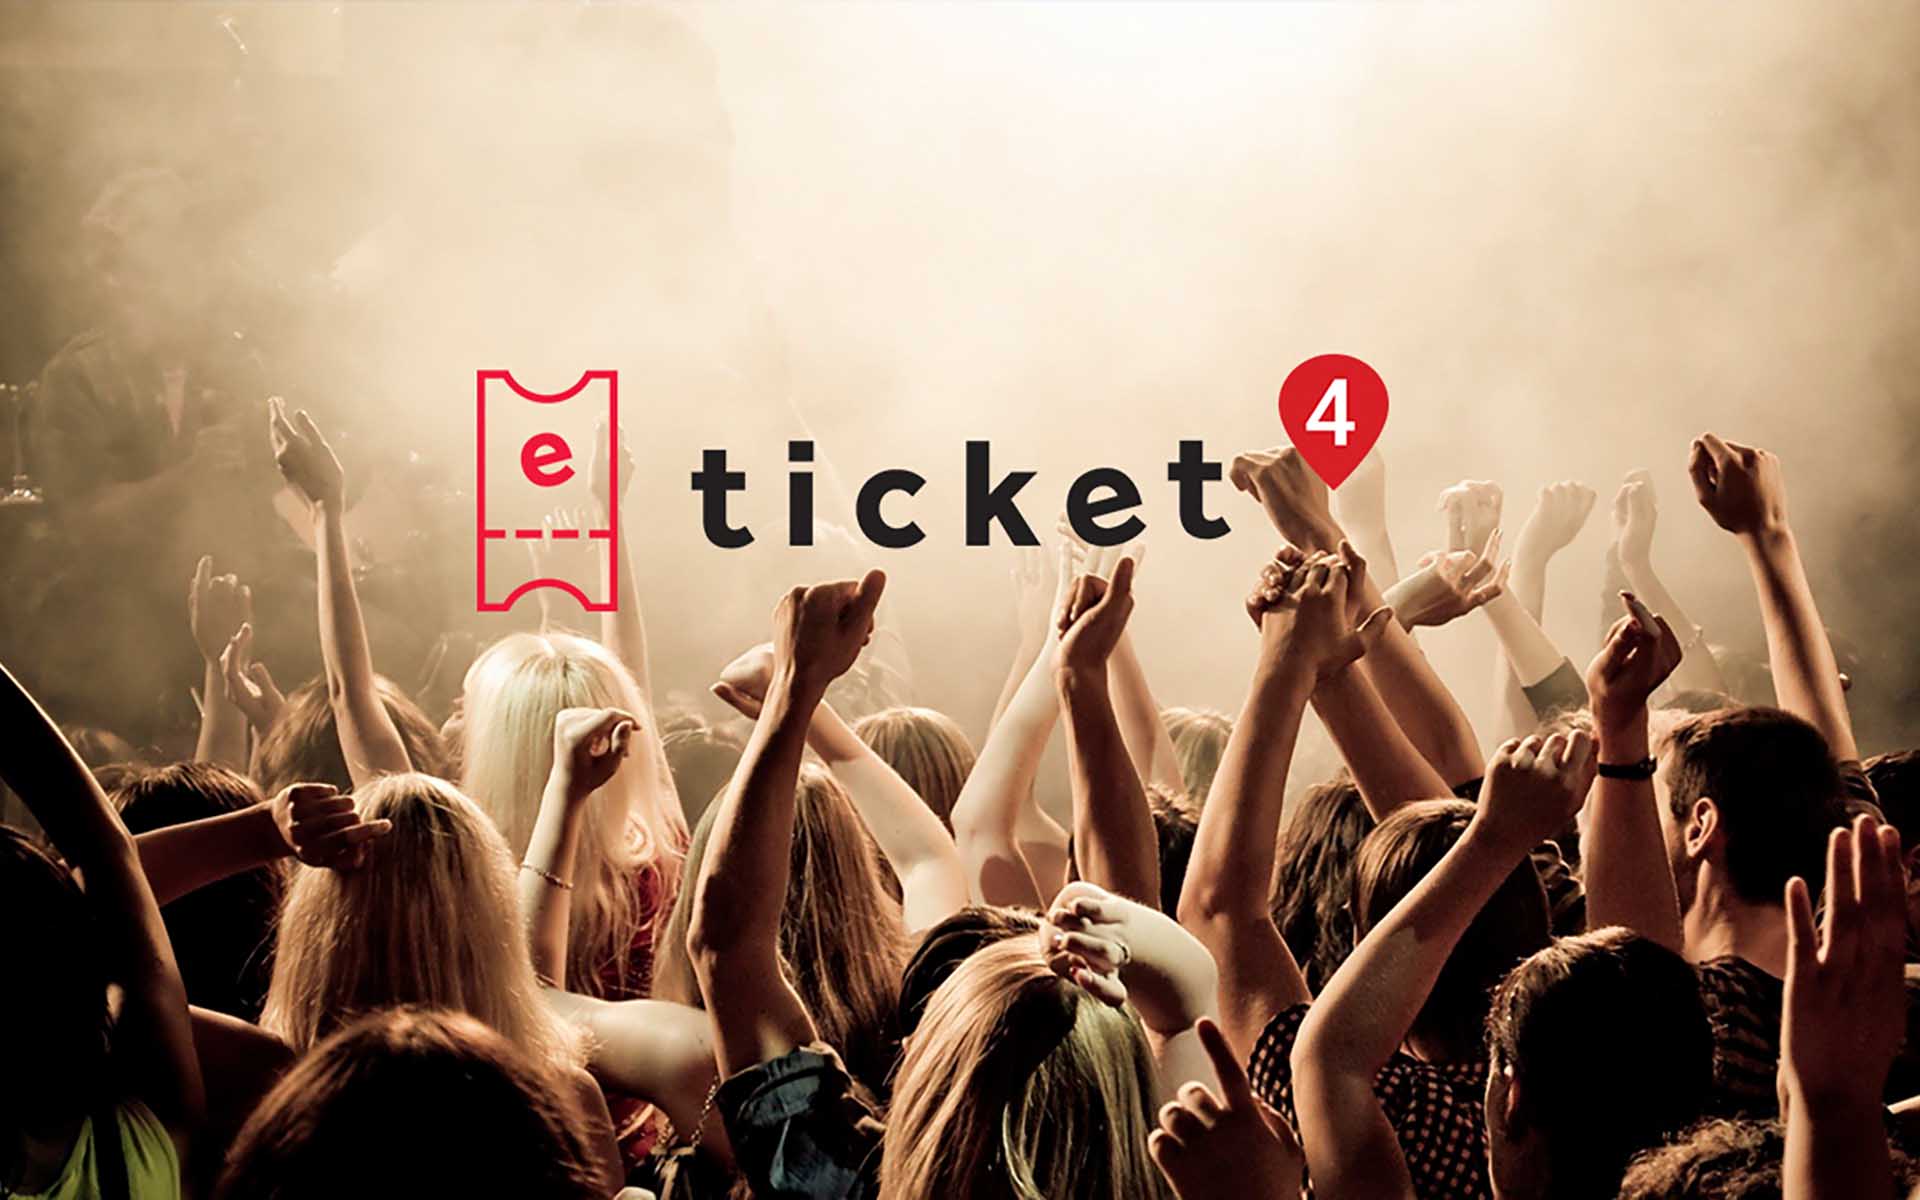 Eticket4’s ICO: Possibility to Buy a Ticket at Any Time, Even When All Tickets Are Sold Out